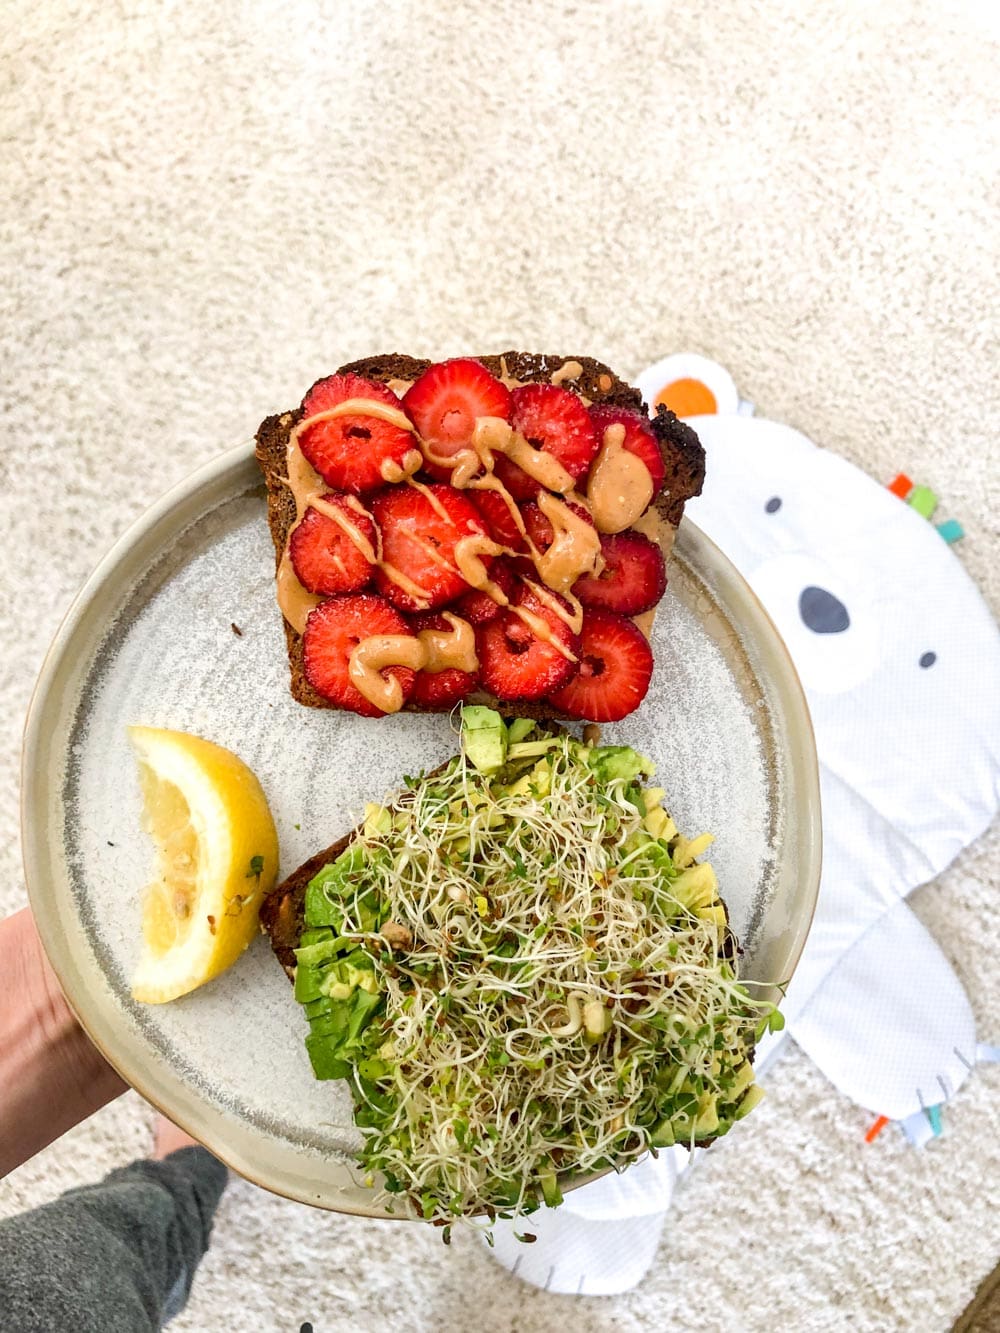 Peanut butter strawberry toast and avocado sprout toast